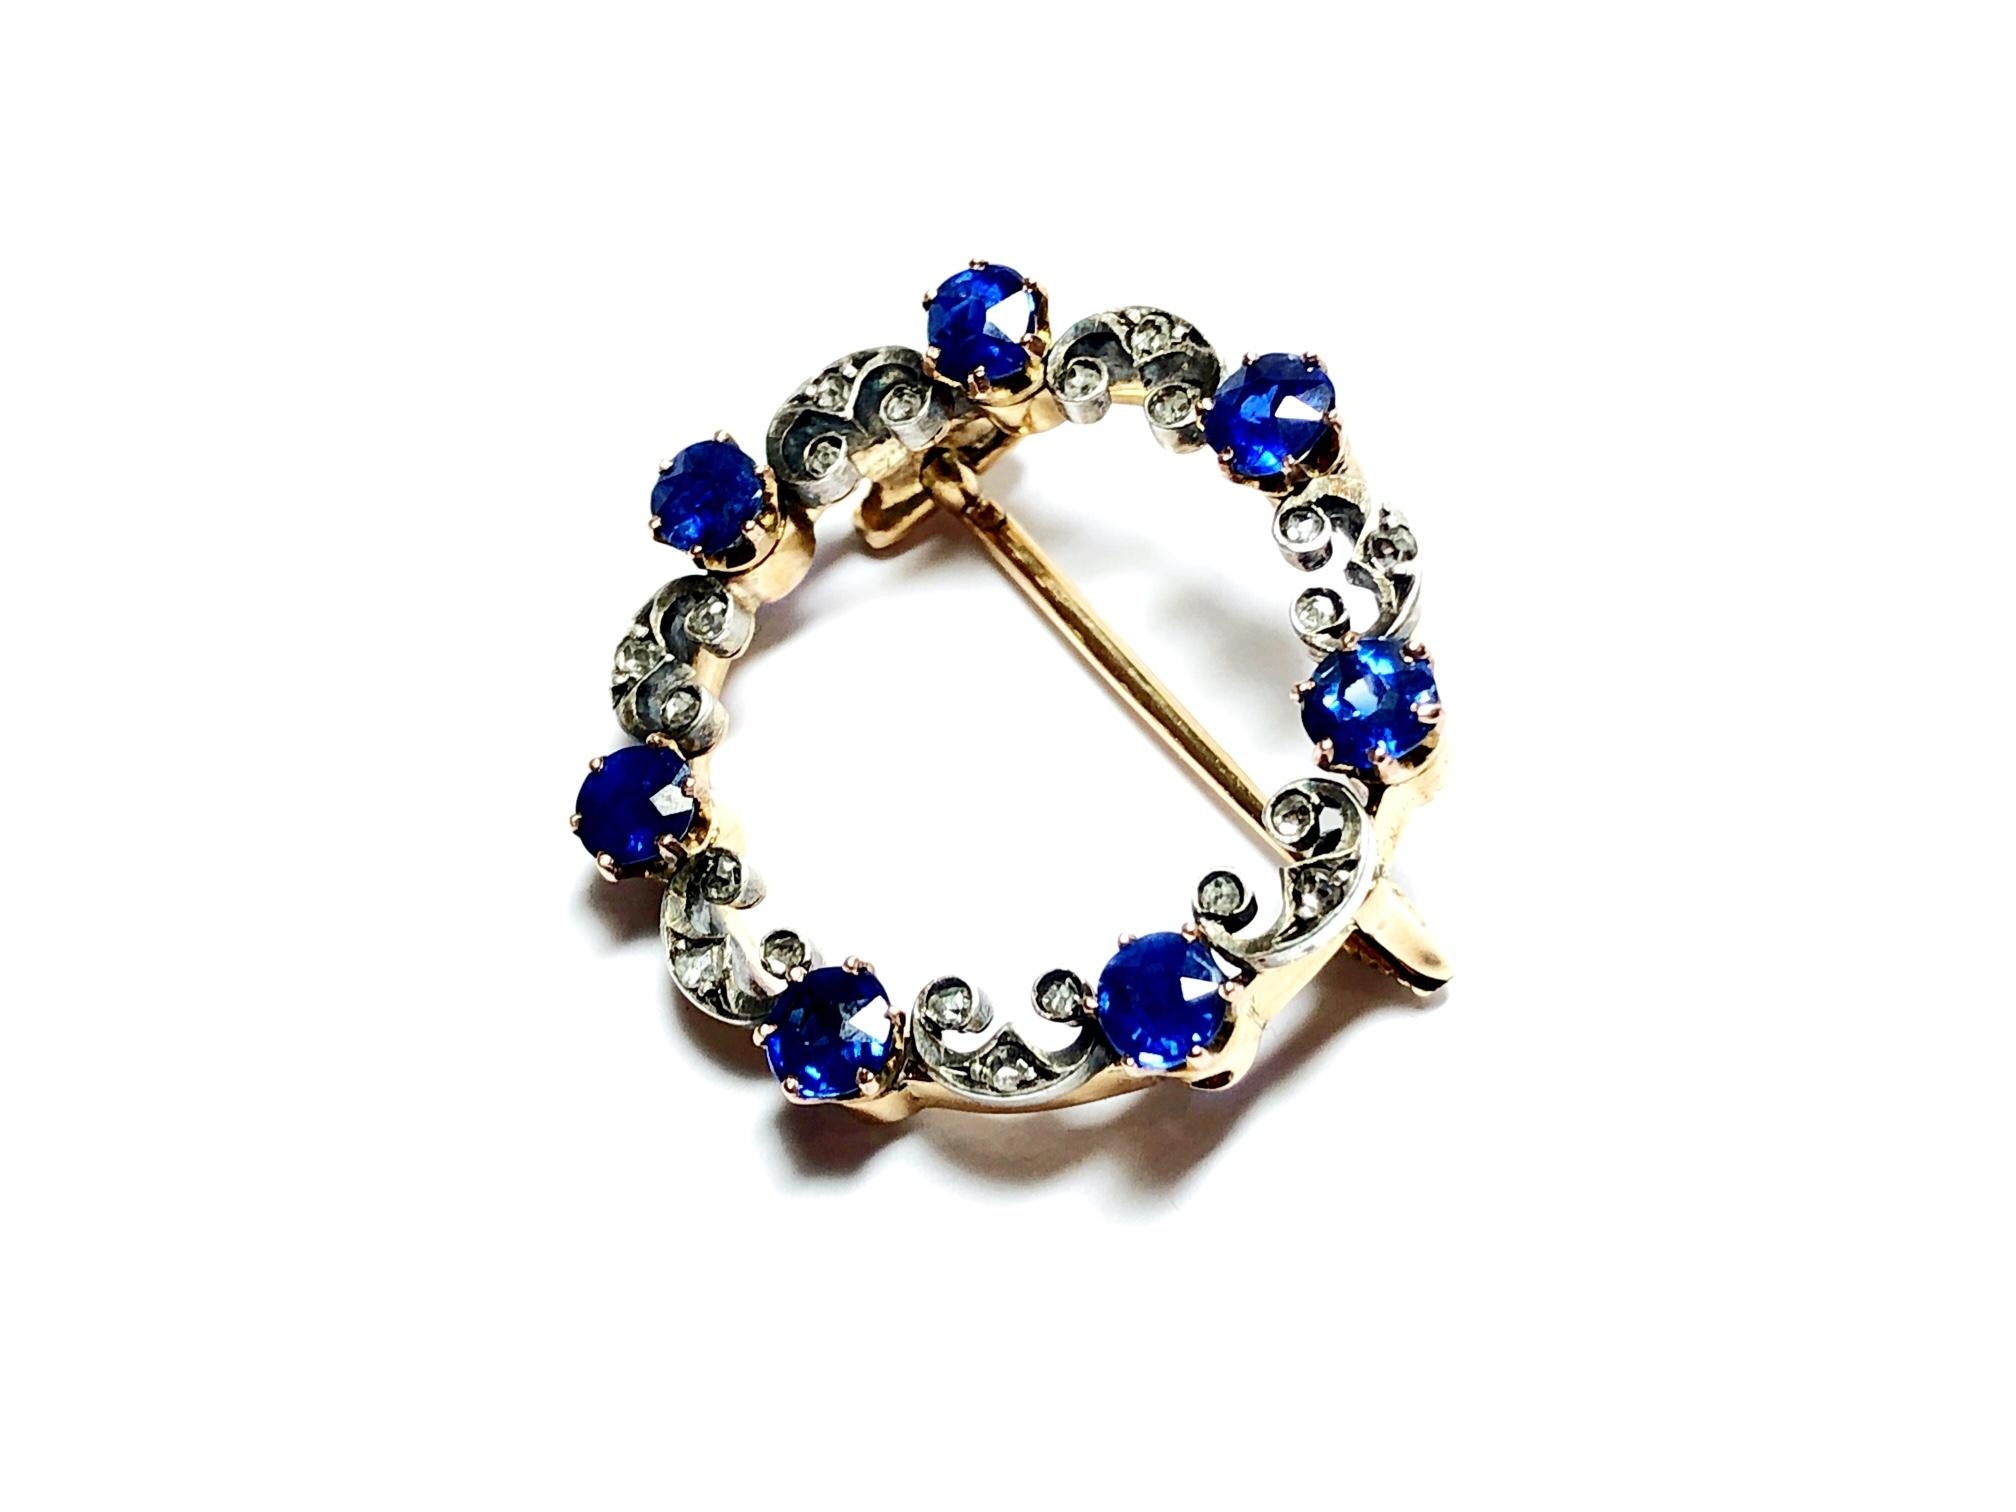 Victorian Antique Sapphire, Diamond, Gold and Silver Circle Brooch, circa 1900 For Sale